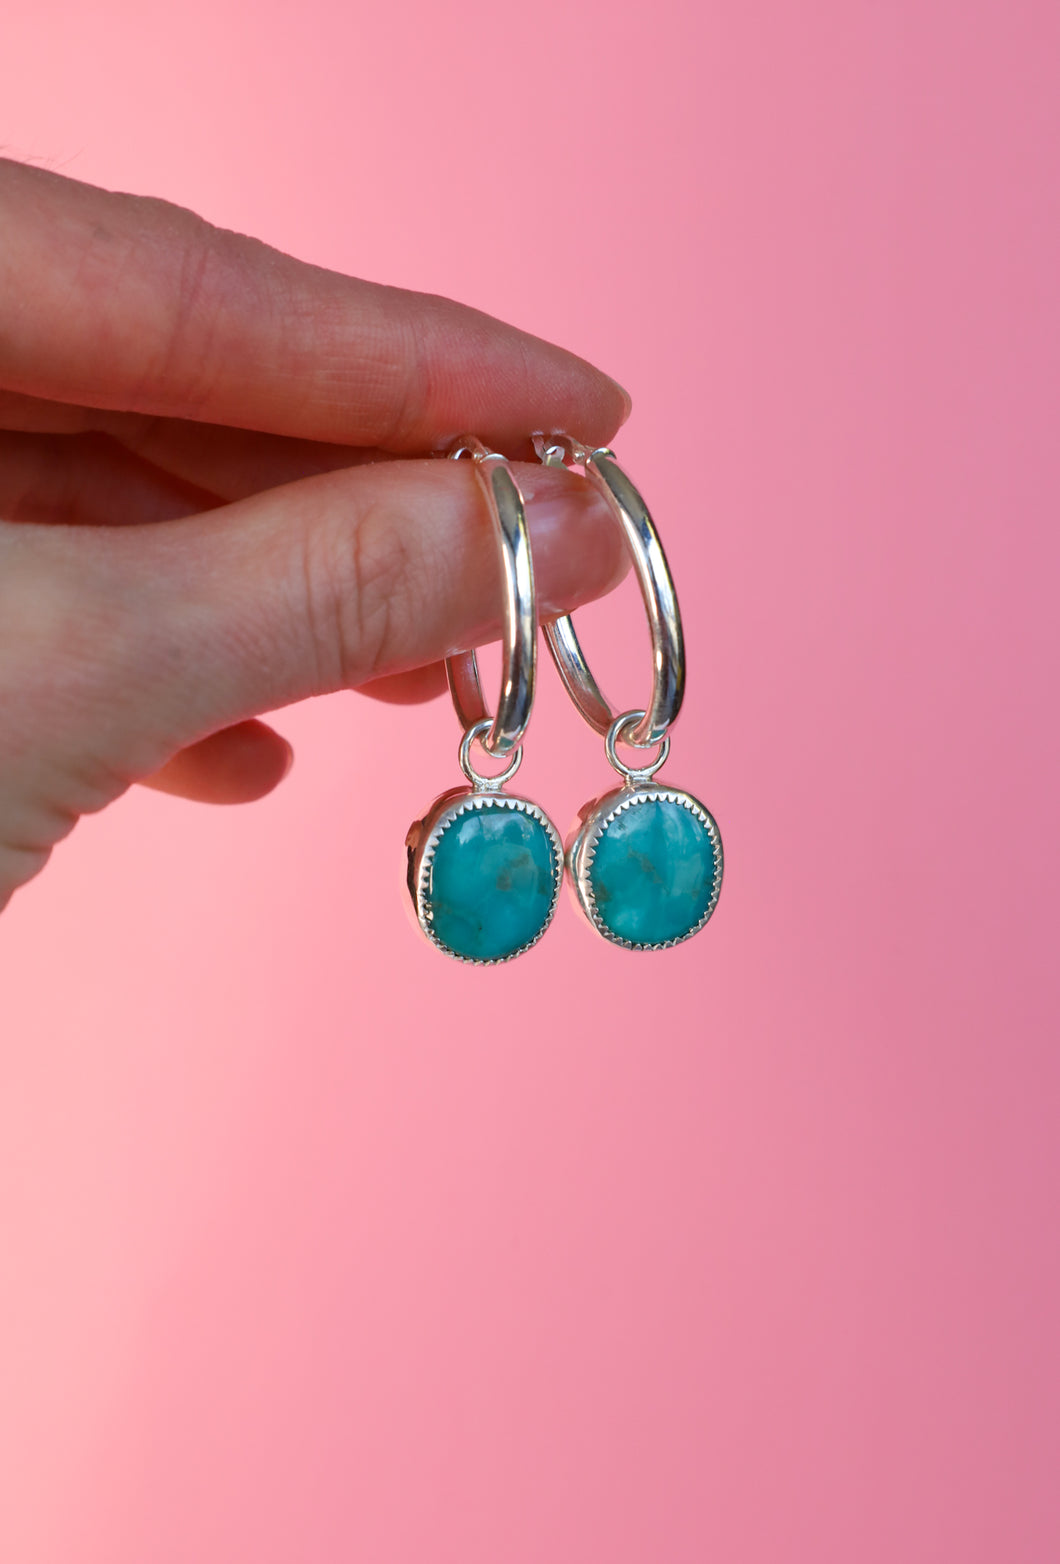 high-grade campitos turquoise hoops